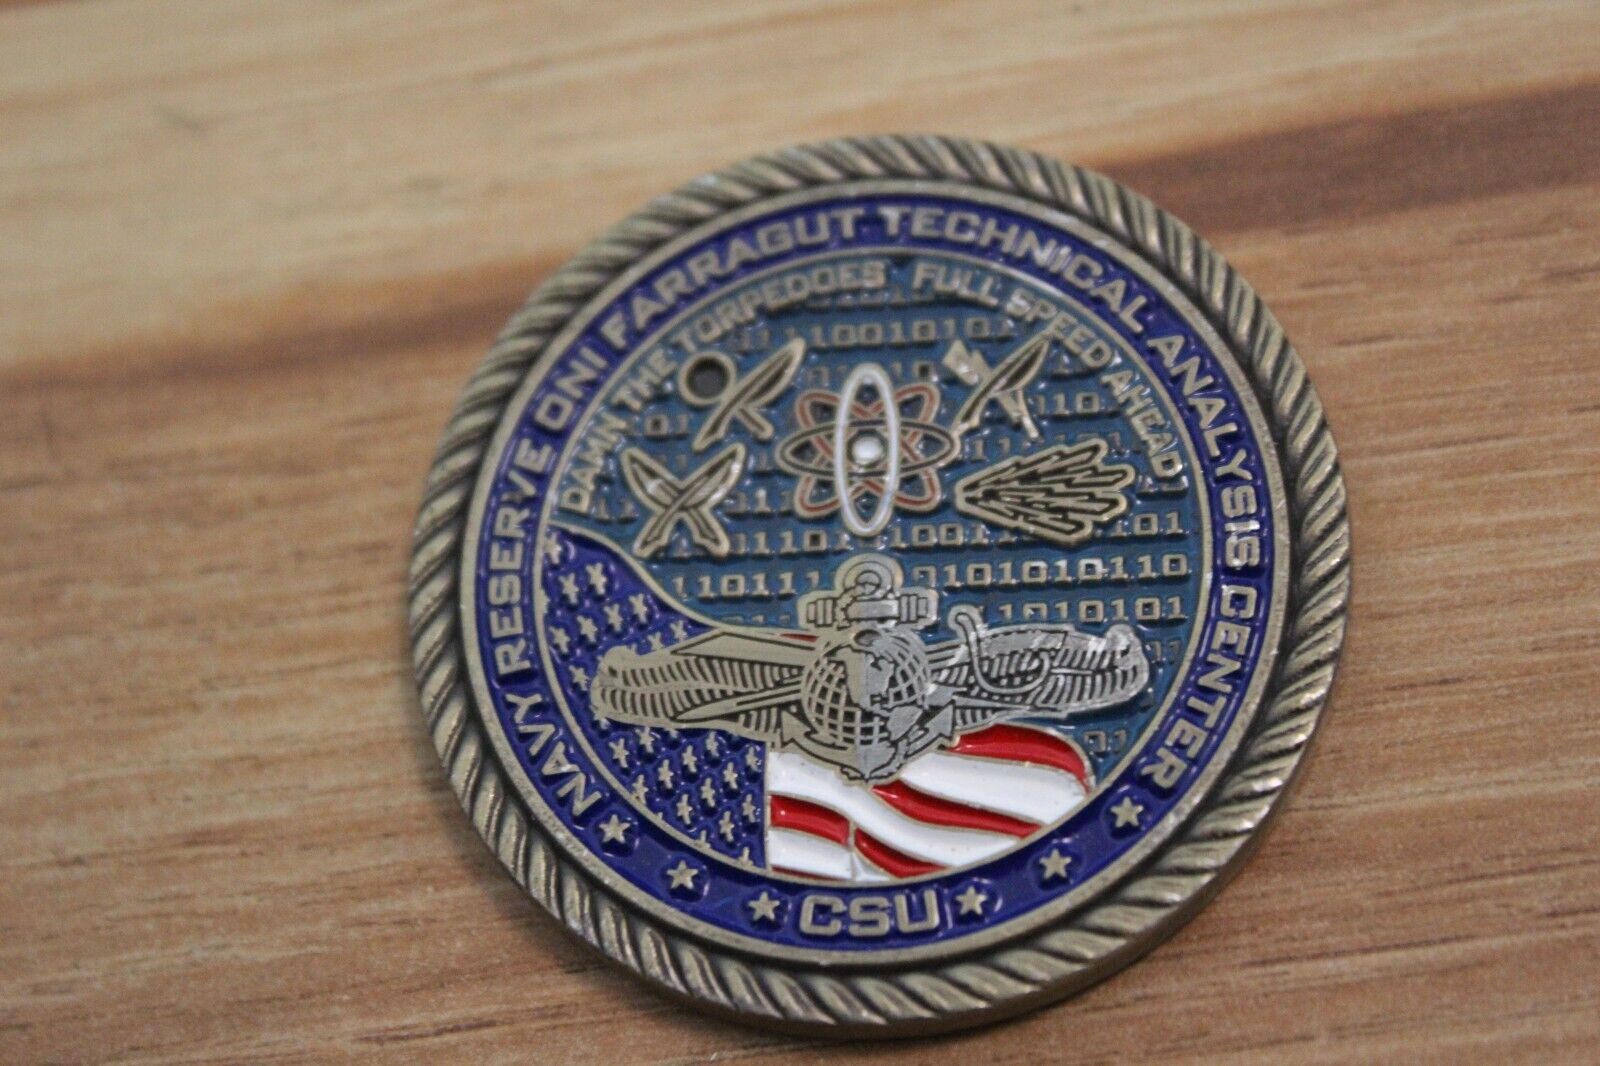 Navy Reserve ONI Farragut Technical Analysis Center Challenge Coin